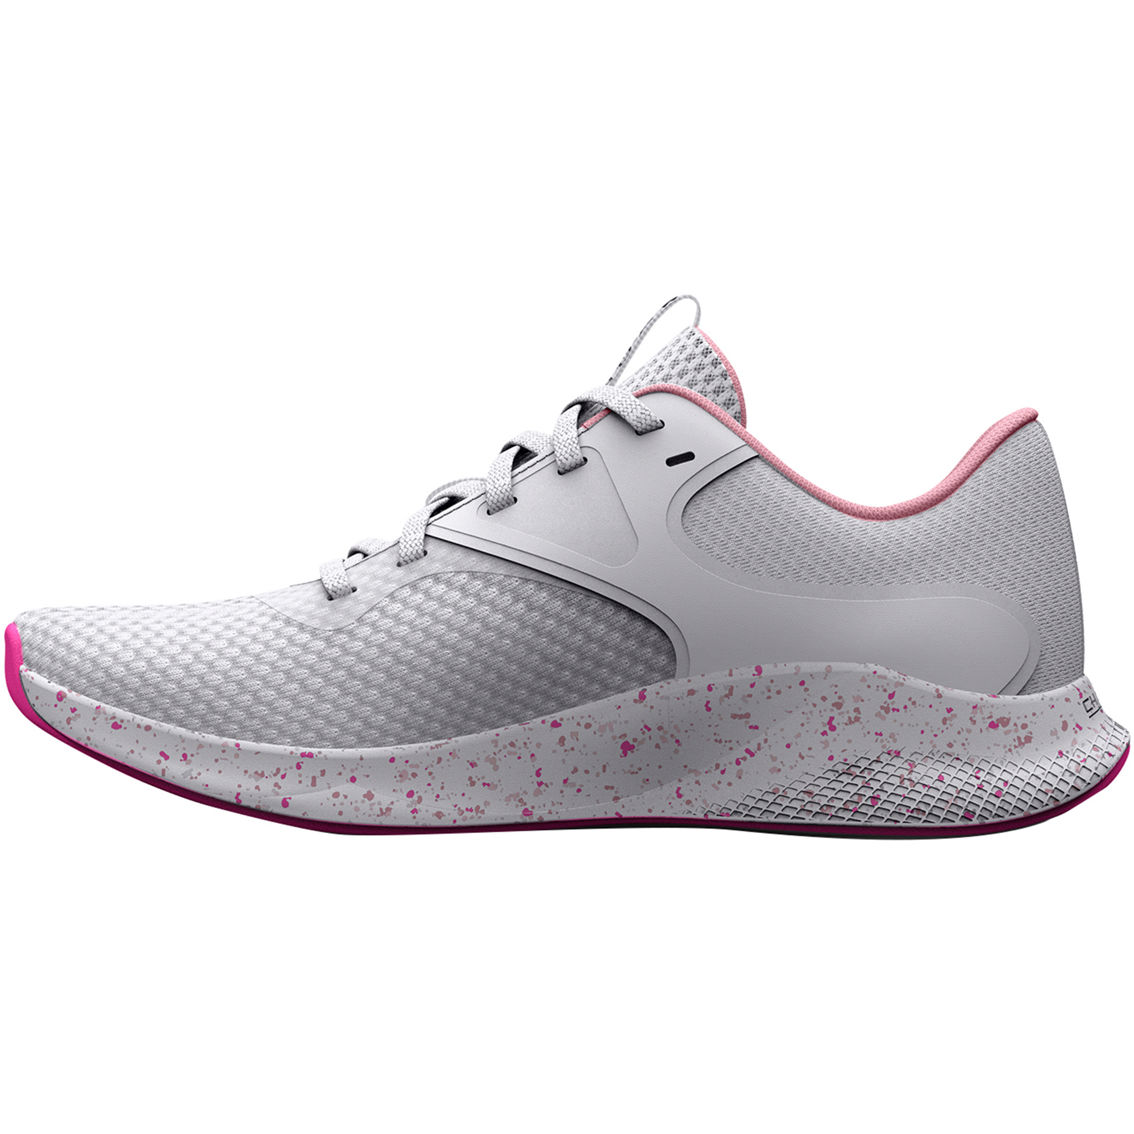 Under Armour Women's Charged Aurora 2 Lux Running Shoes - Image 3 of 5